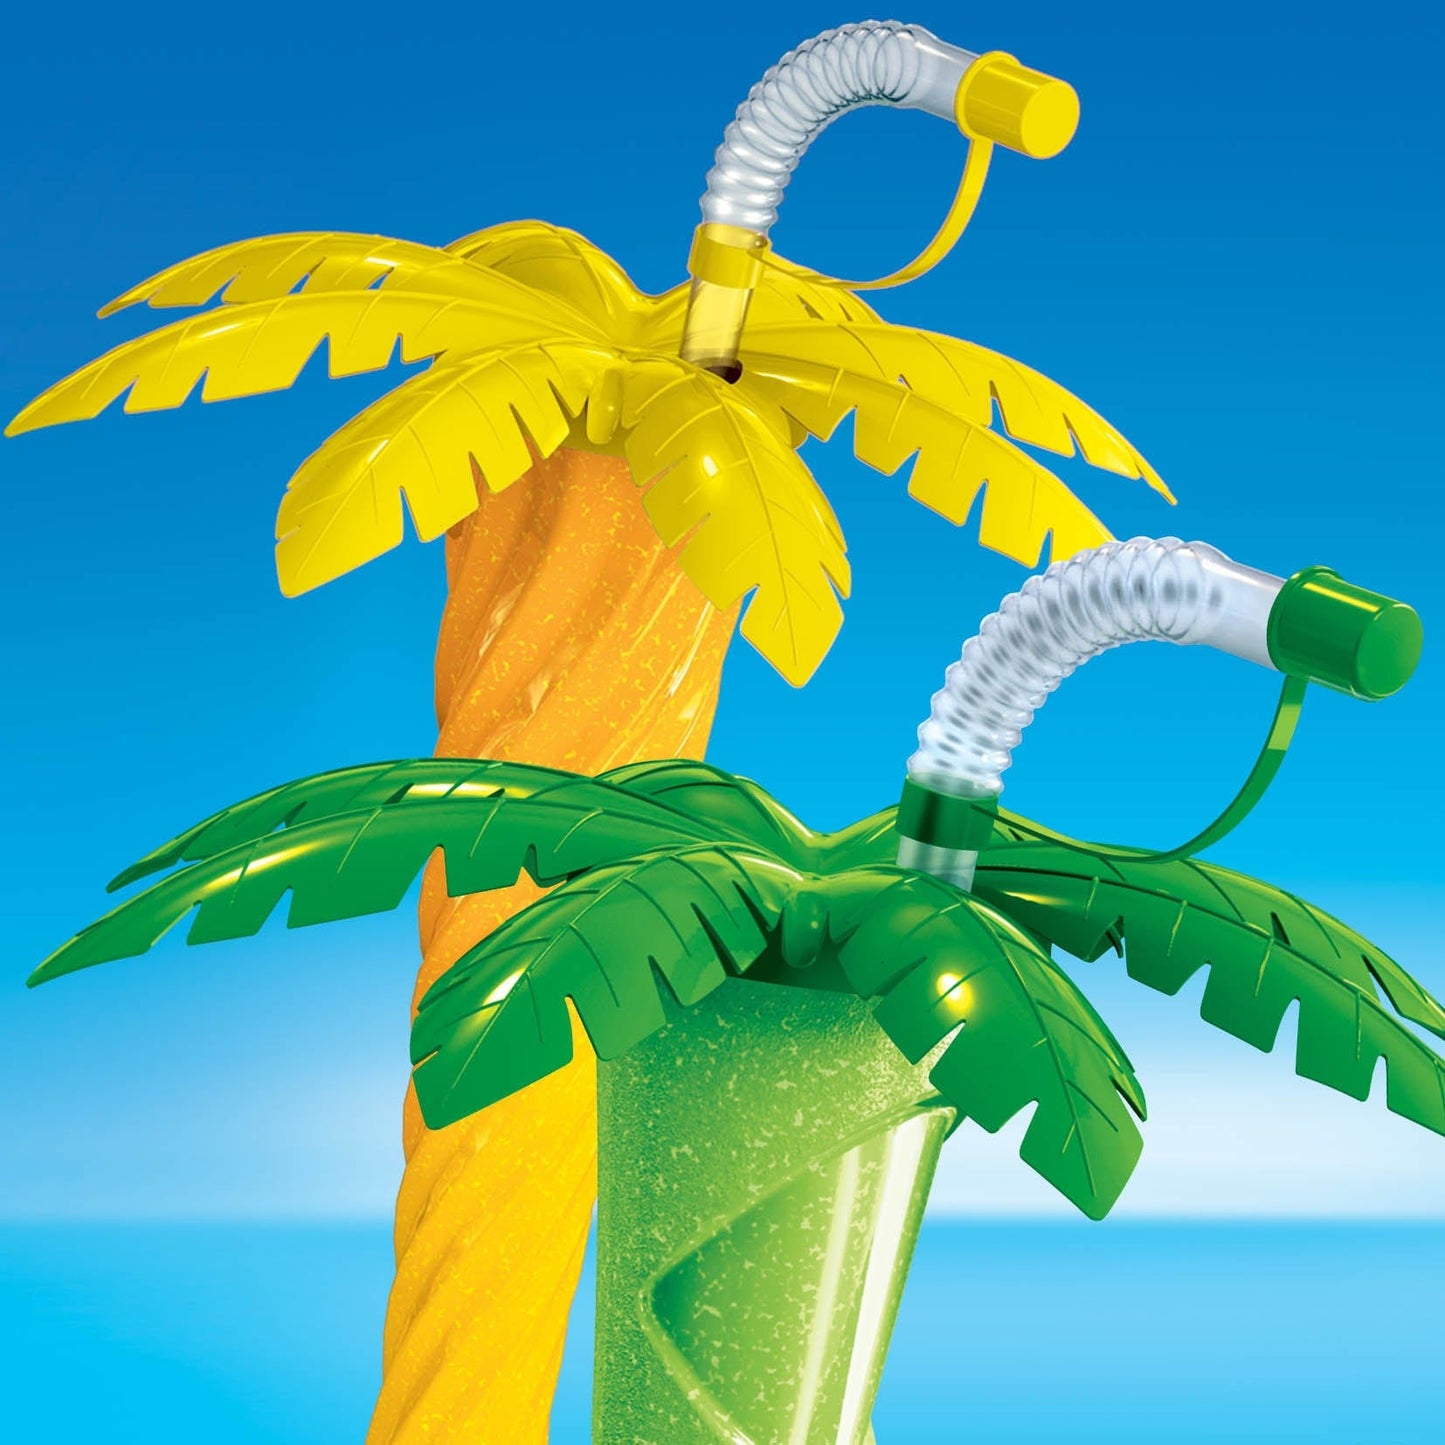 Sweet World USA Yard Cups Palm Cup Palm Tree Luau Yard Cups (108 cups) - for Margaritas, Cold Drinks, Frozen Drinks, Kids Parties - 14 oz. (400 ml) - Green cups with lids and straws